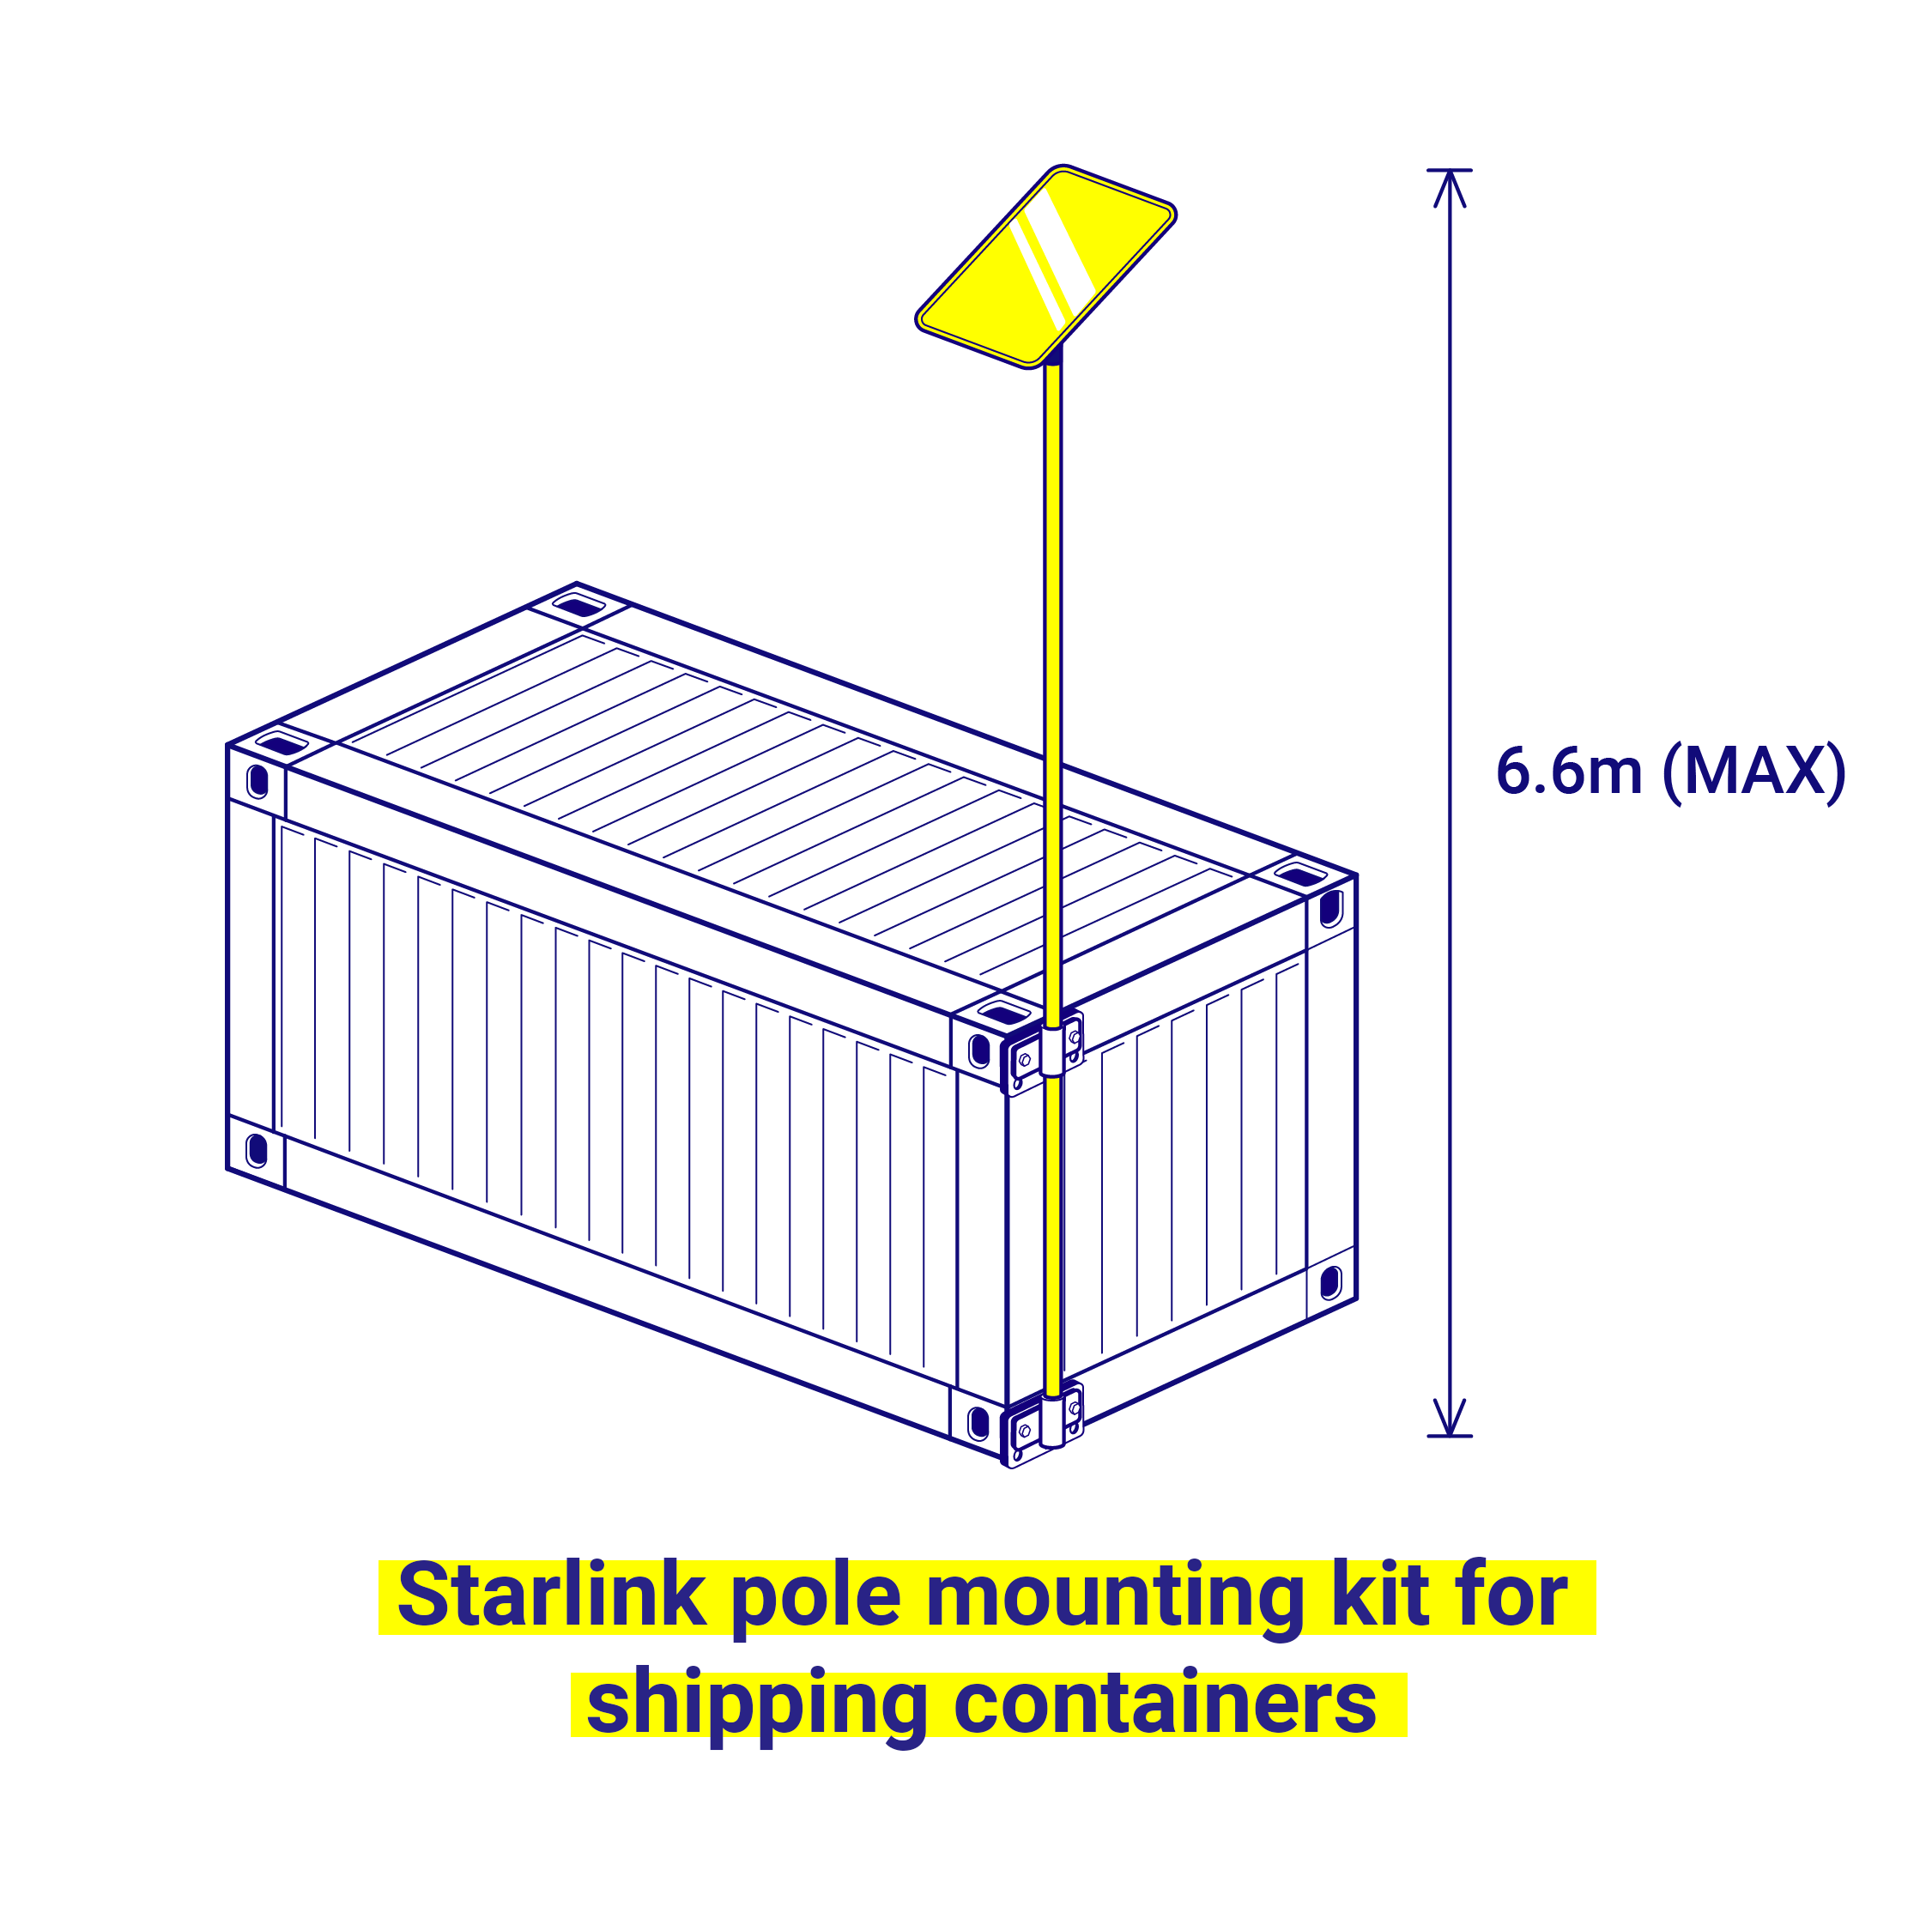 Shipping container starlink pole mounting kit for shipping containers up to 6.6m from the ground